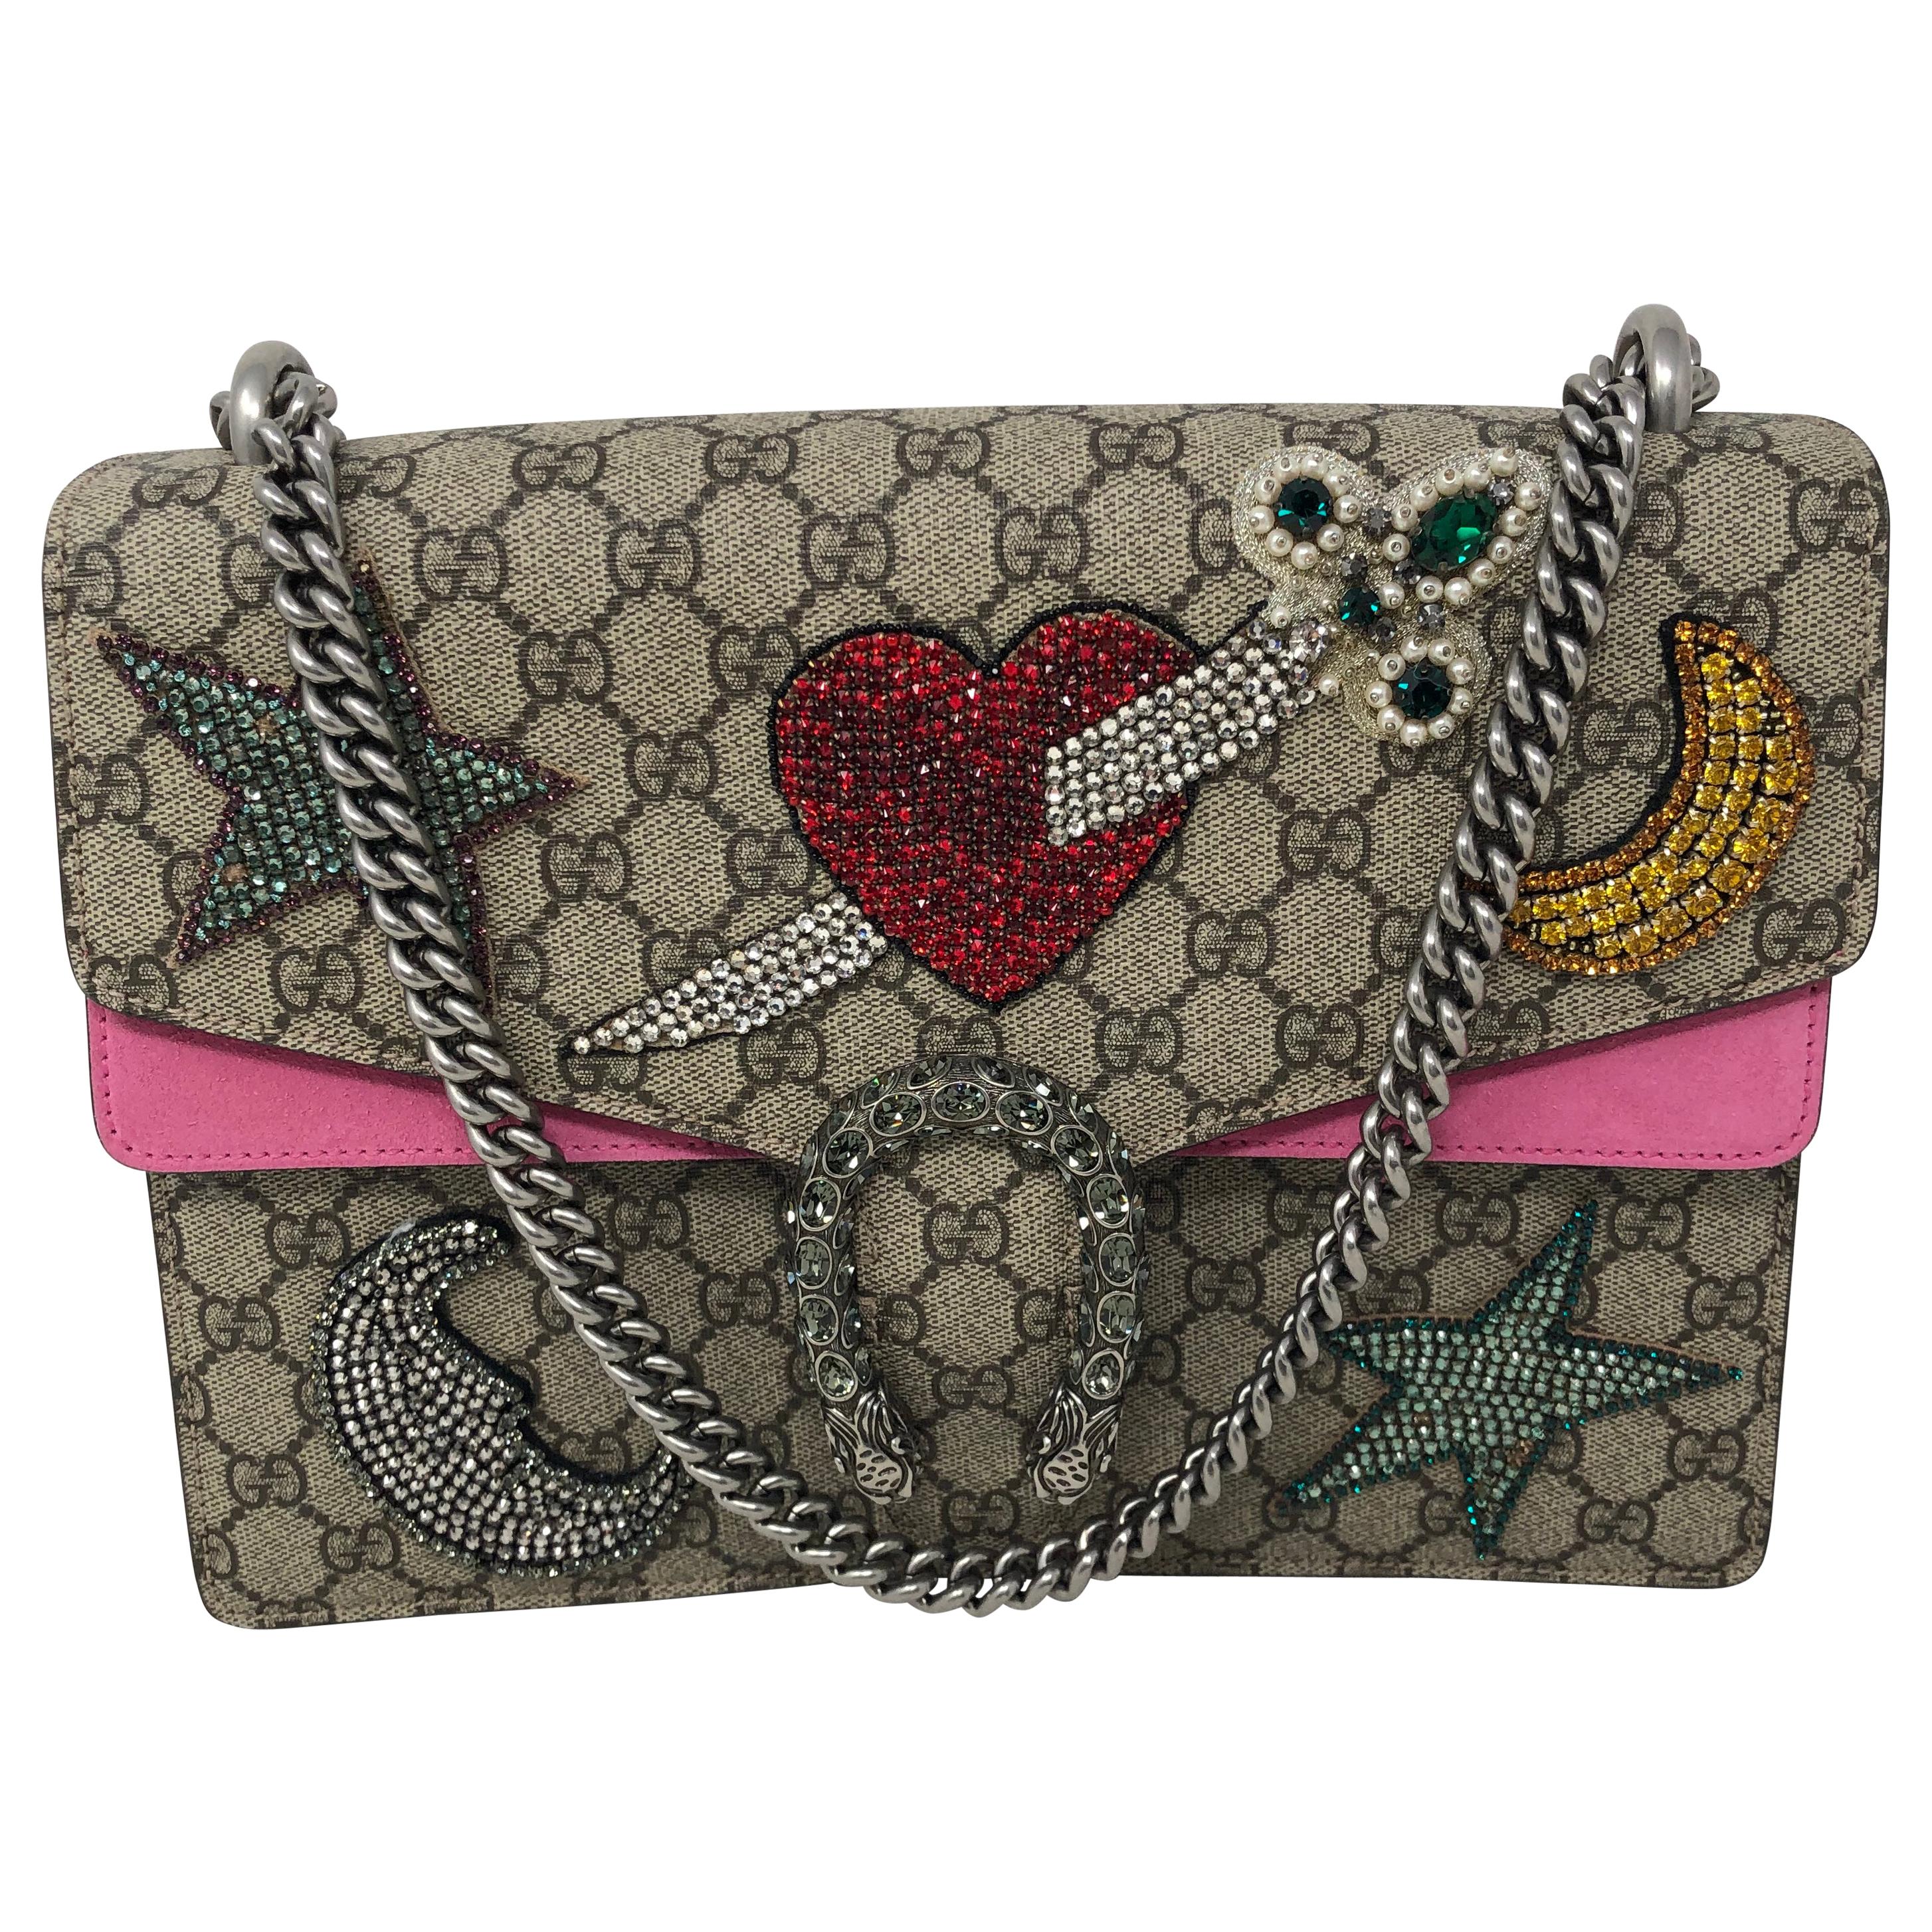 Gucci Dionysus Star, Heart, and Moon Bag 